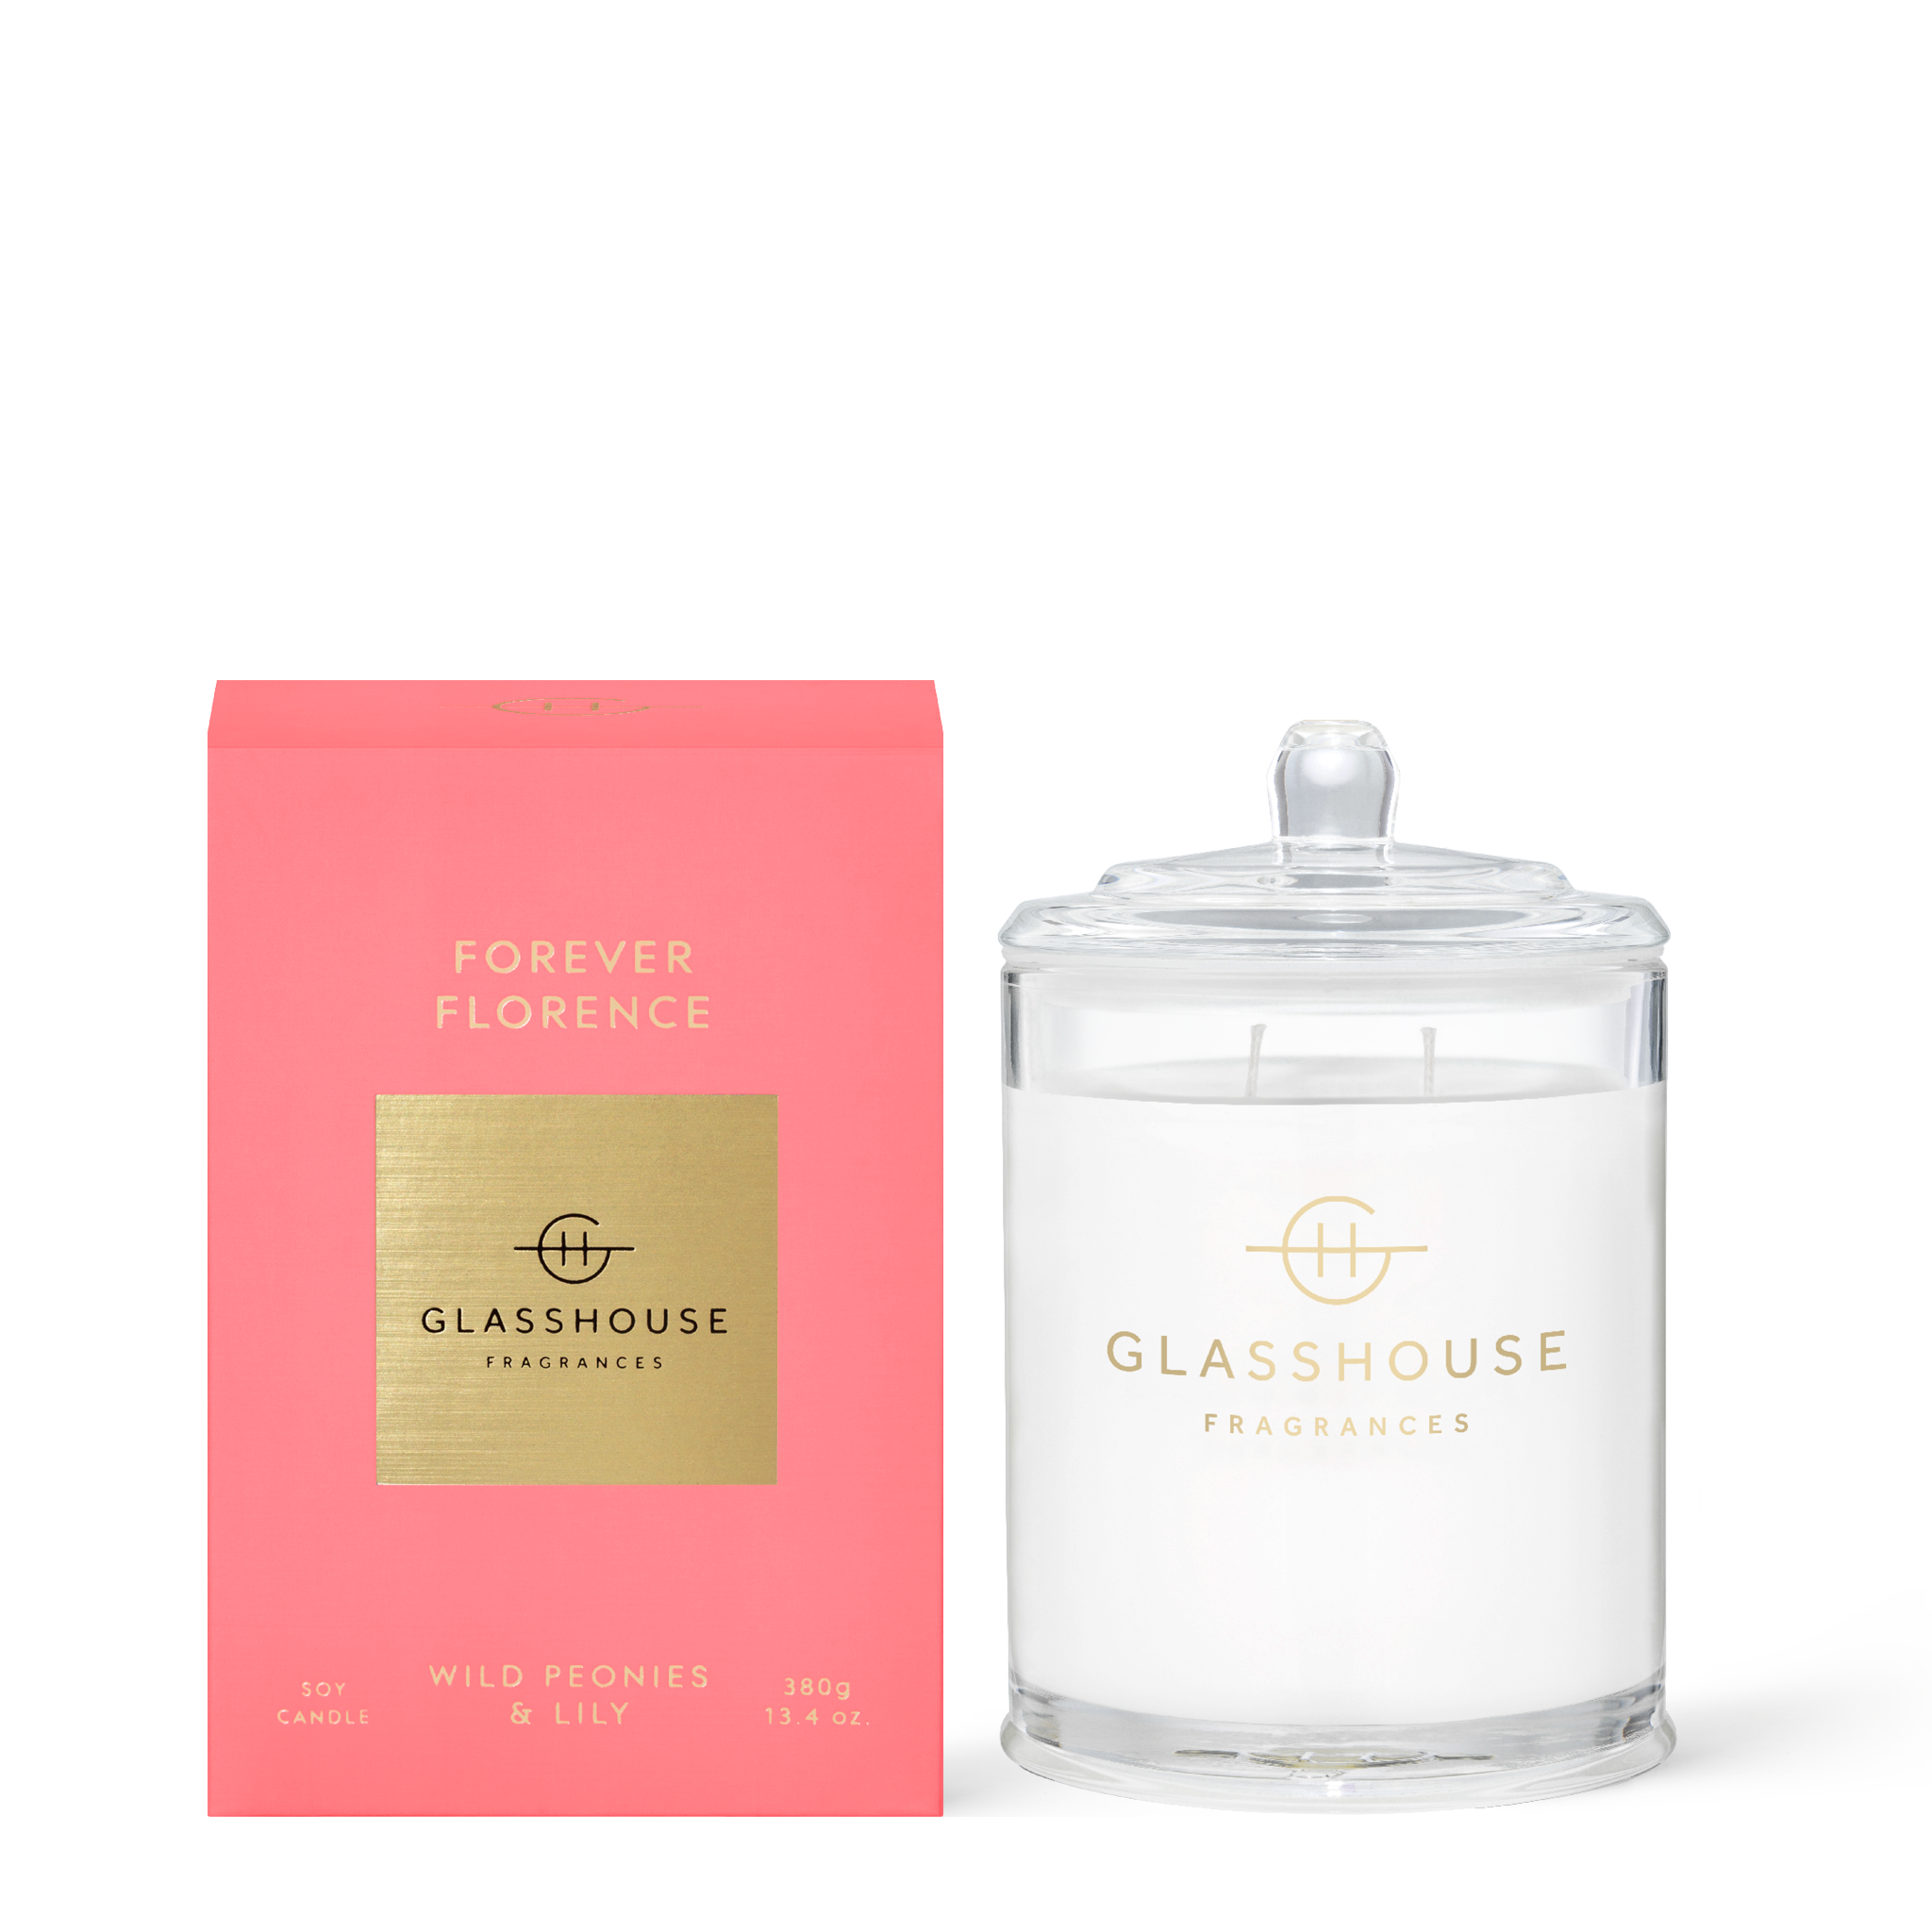 Glasshouse Fragrances Forever Florence Wild Peonies and Lily 380g Soy Candle with box